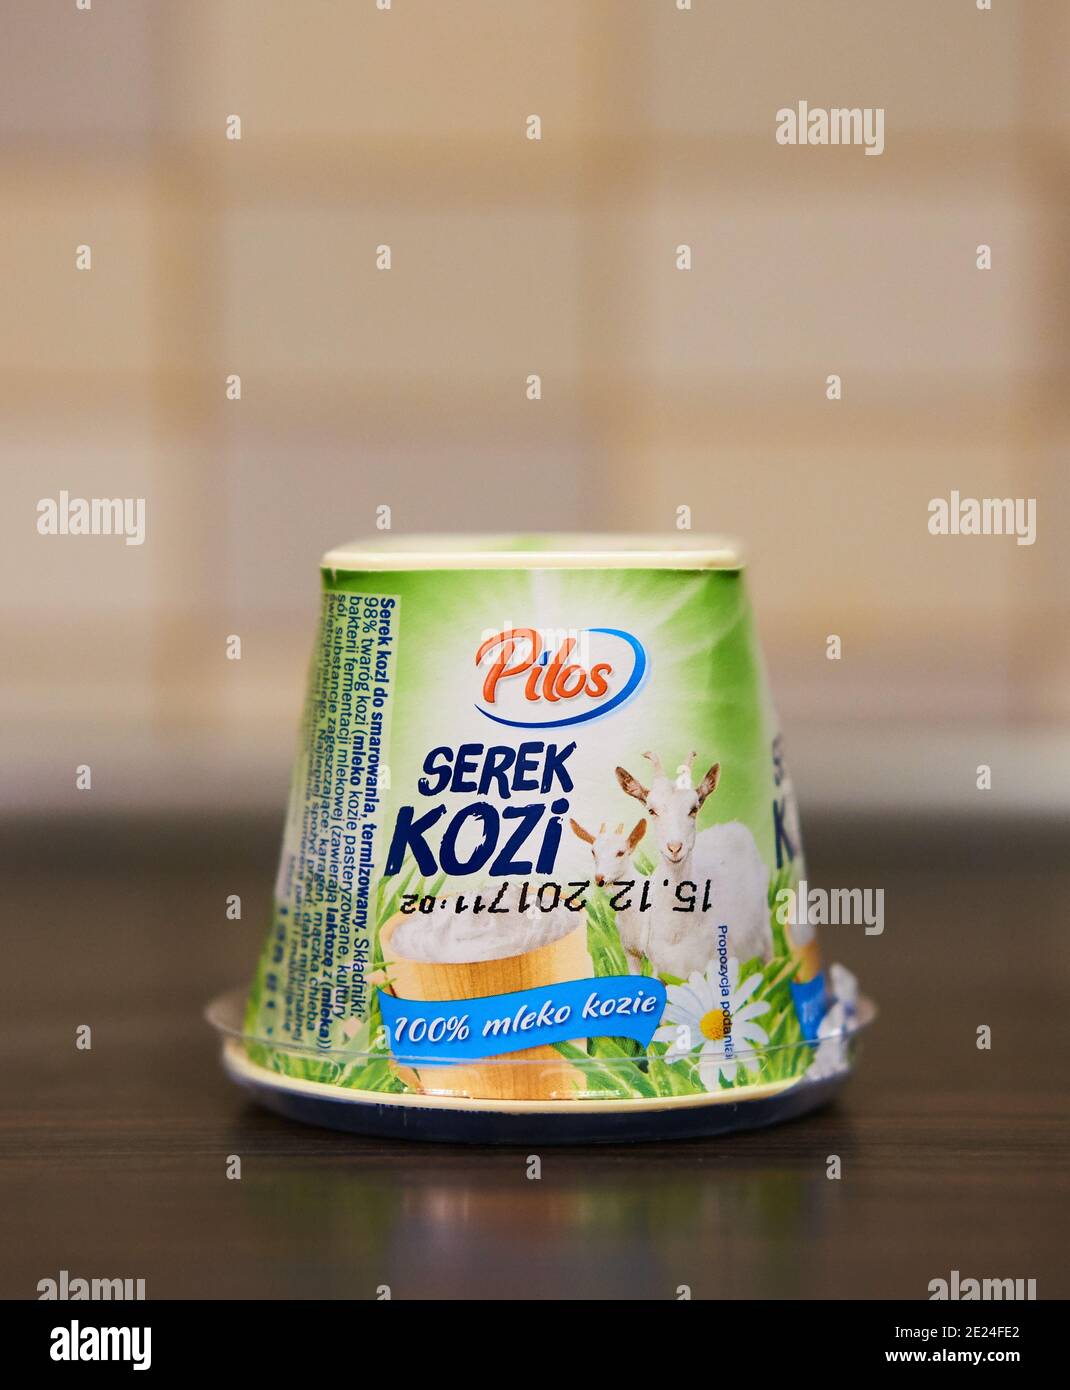 06, table Oct wooden 2017: POZNAN, a - goat Photo Pilos on Lidl - cheese brand POLAND Alamy Stock